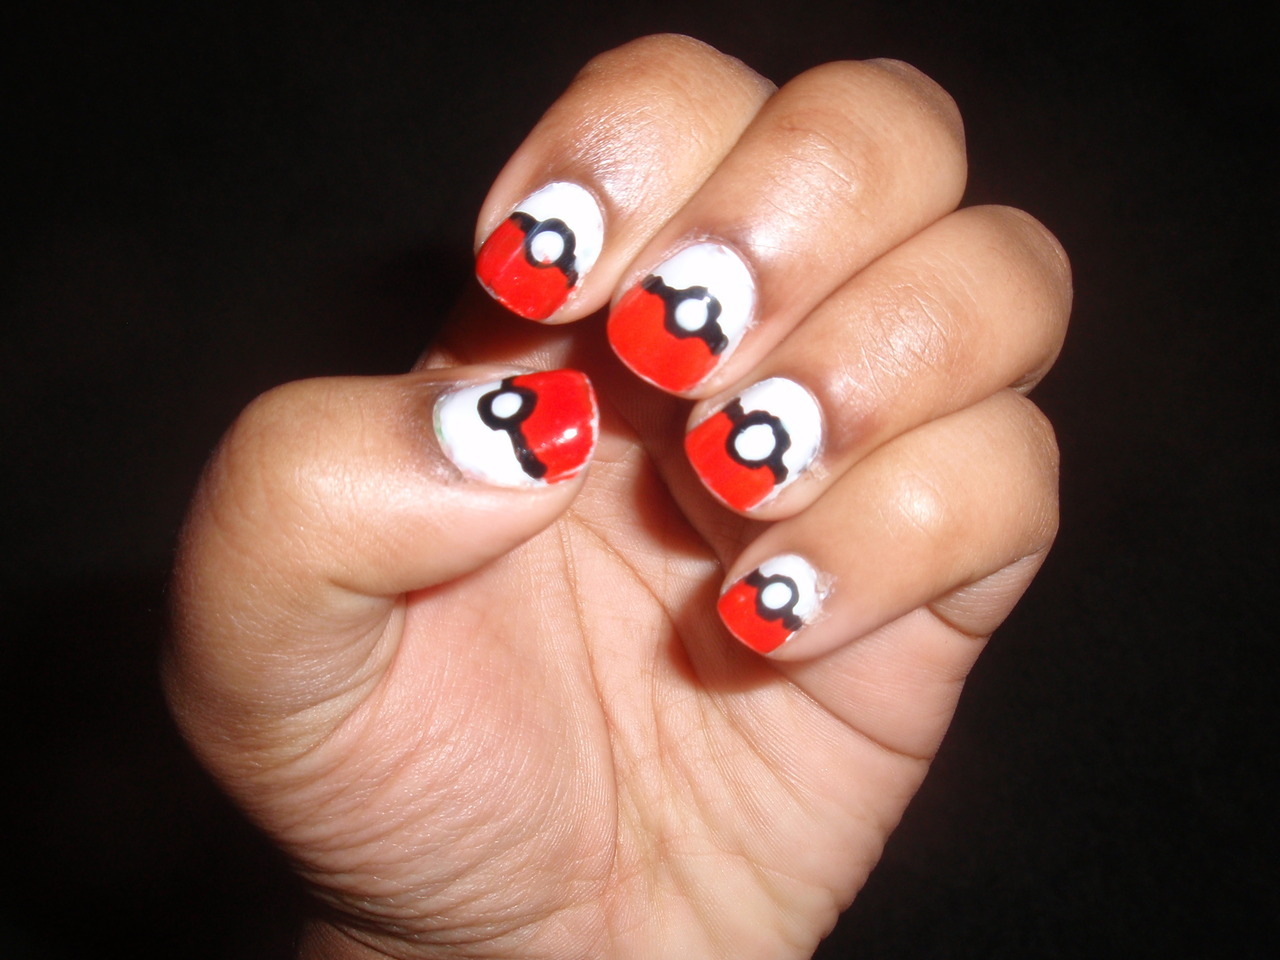 4. Simple Nail Designs on Tumblr - wide 8